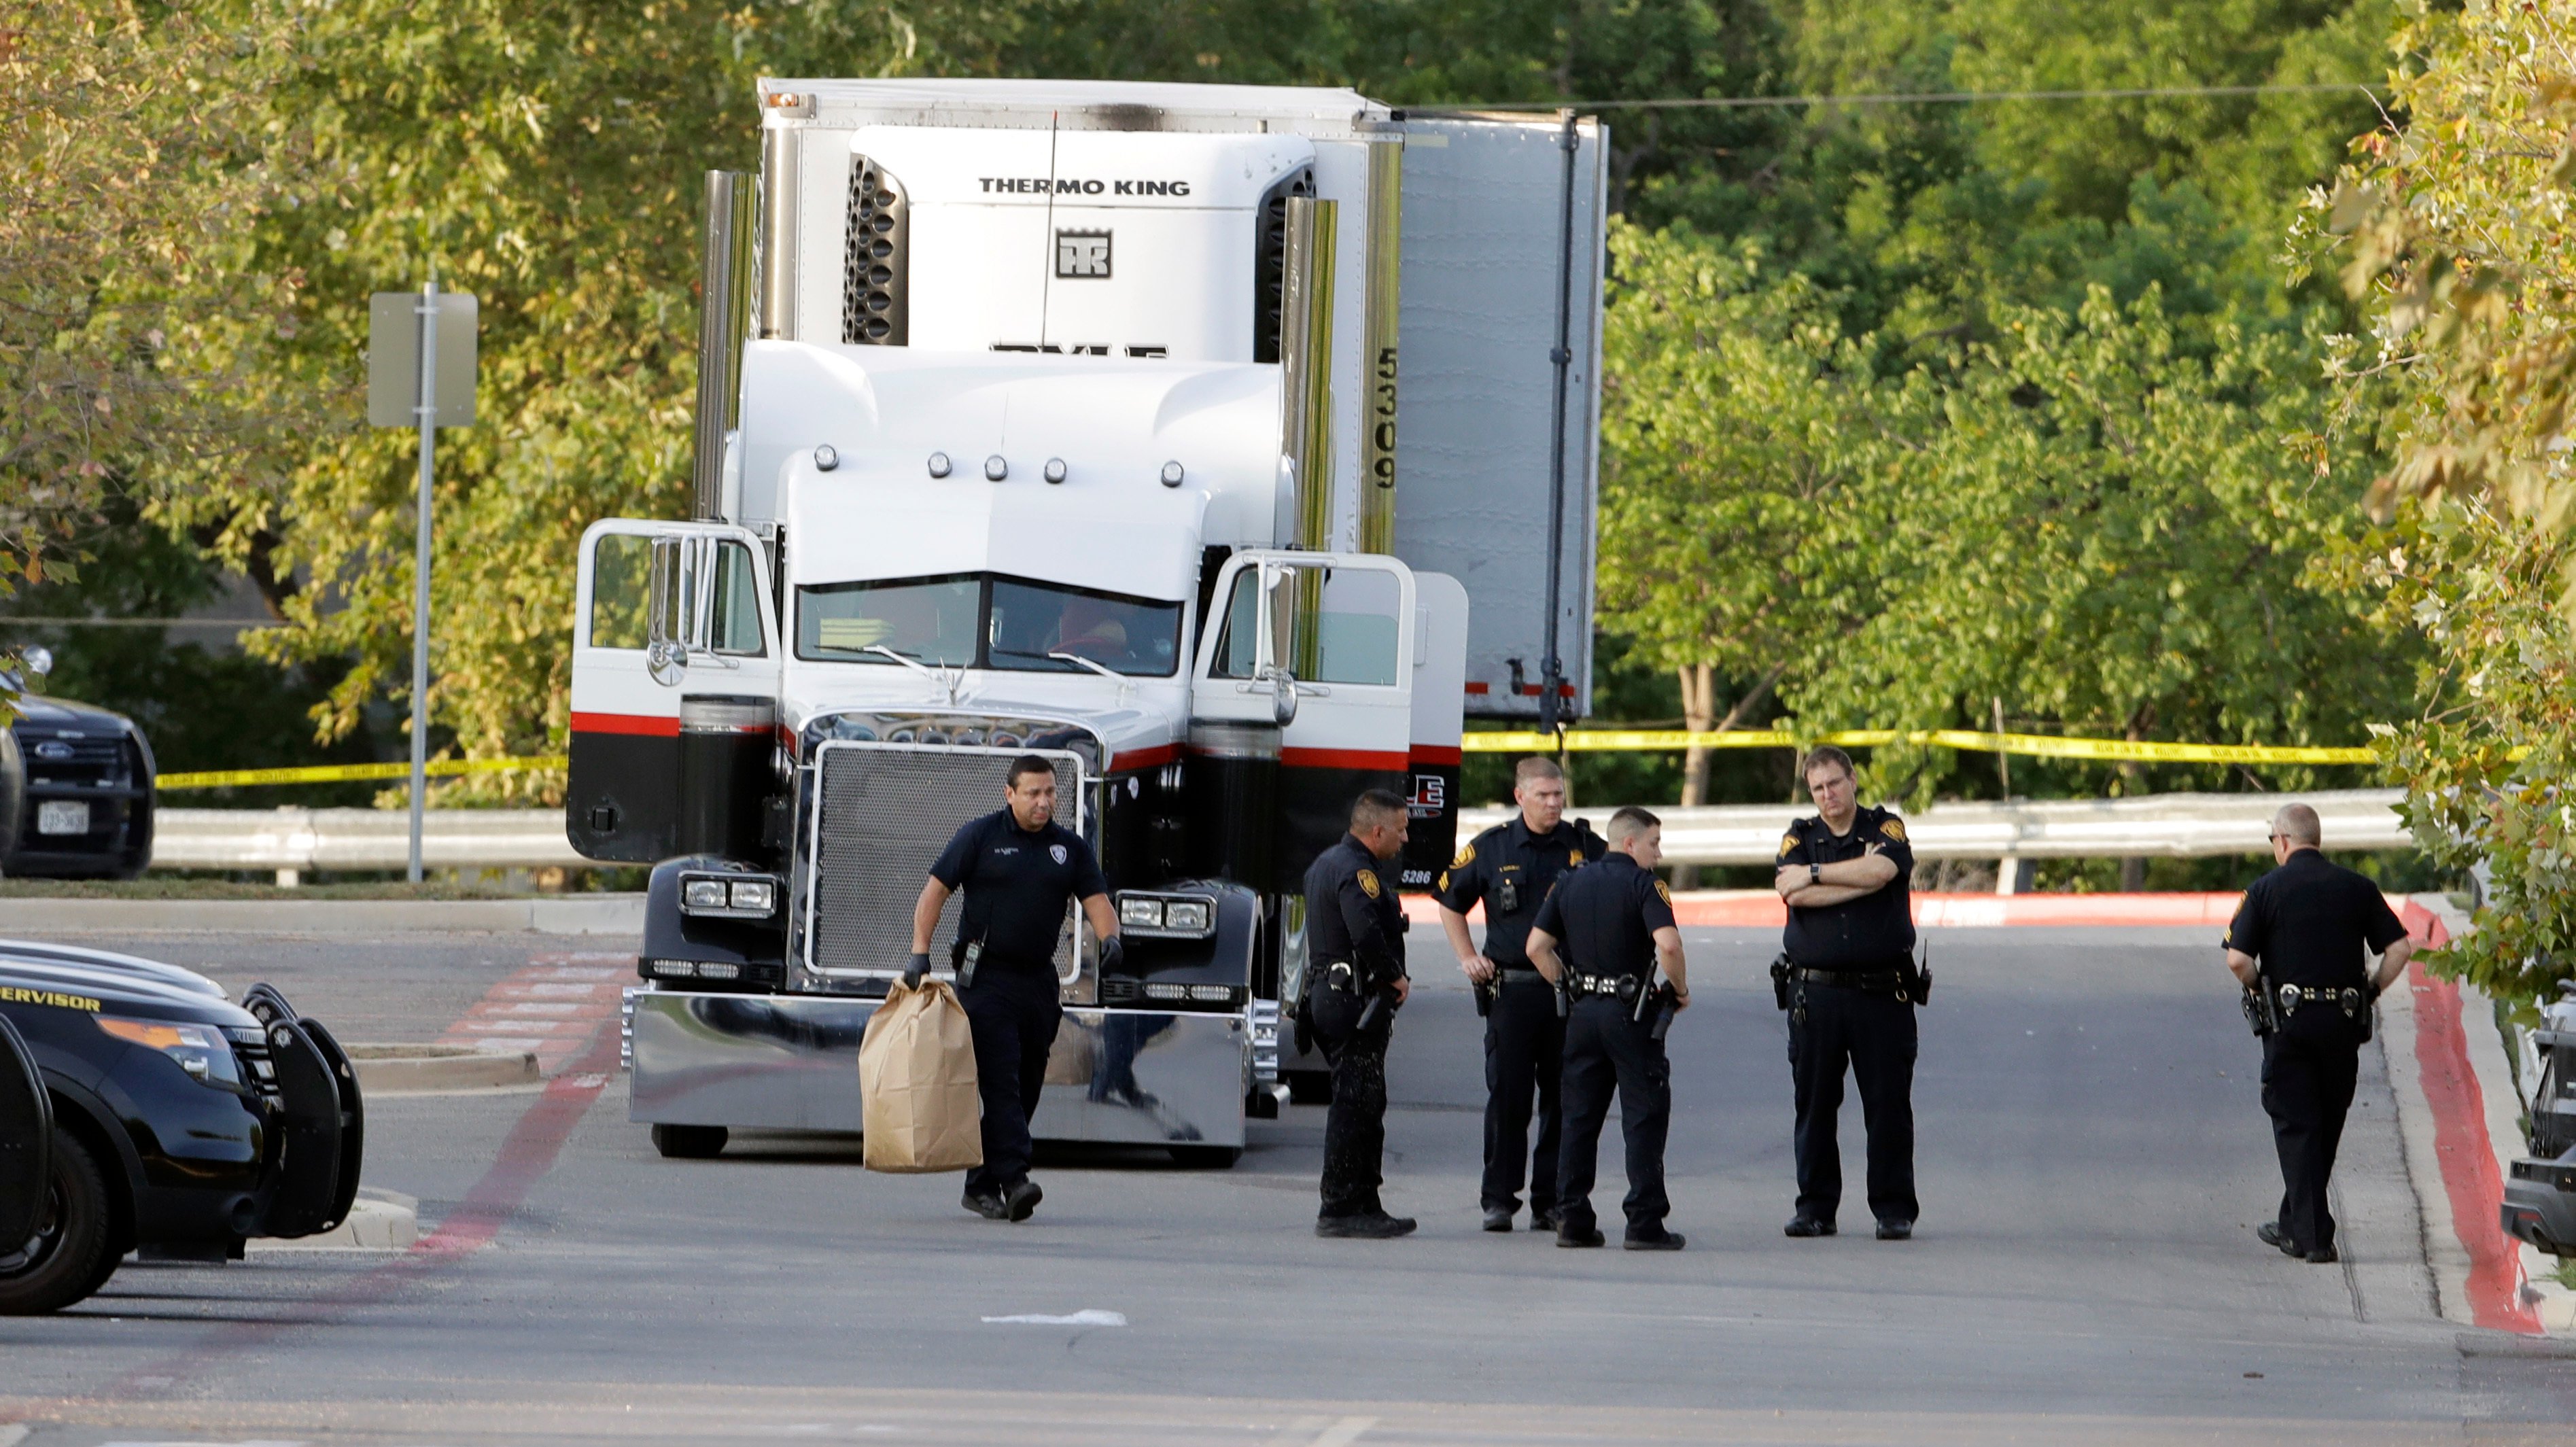 Iowa trucking company that owned the trailer used in a high-profile human trafficking case in which 10 immigrants died